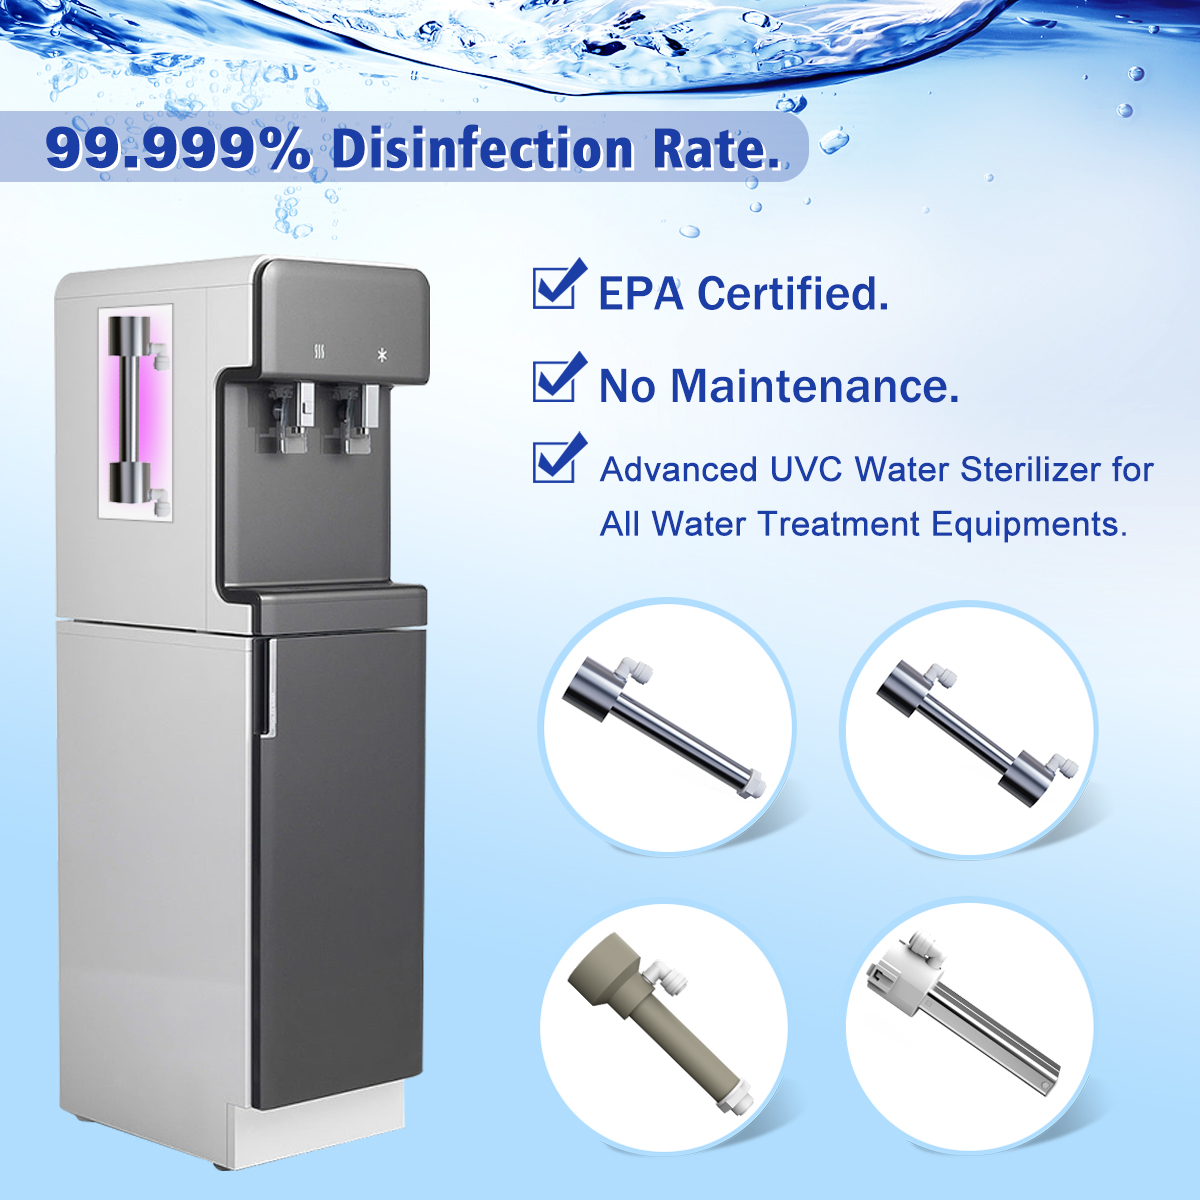 99.999% Disinfection Rate | EPA Certified | No Maintenance | Advanced UVC Water Sterilizer for All Water Treatment Equipments.